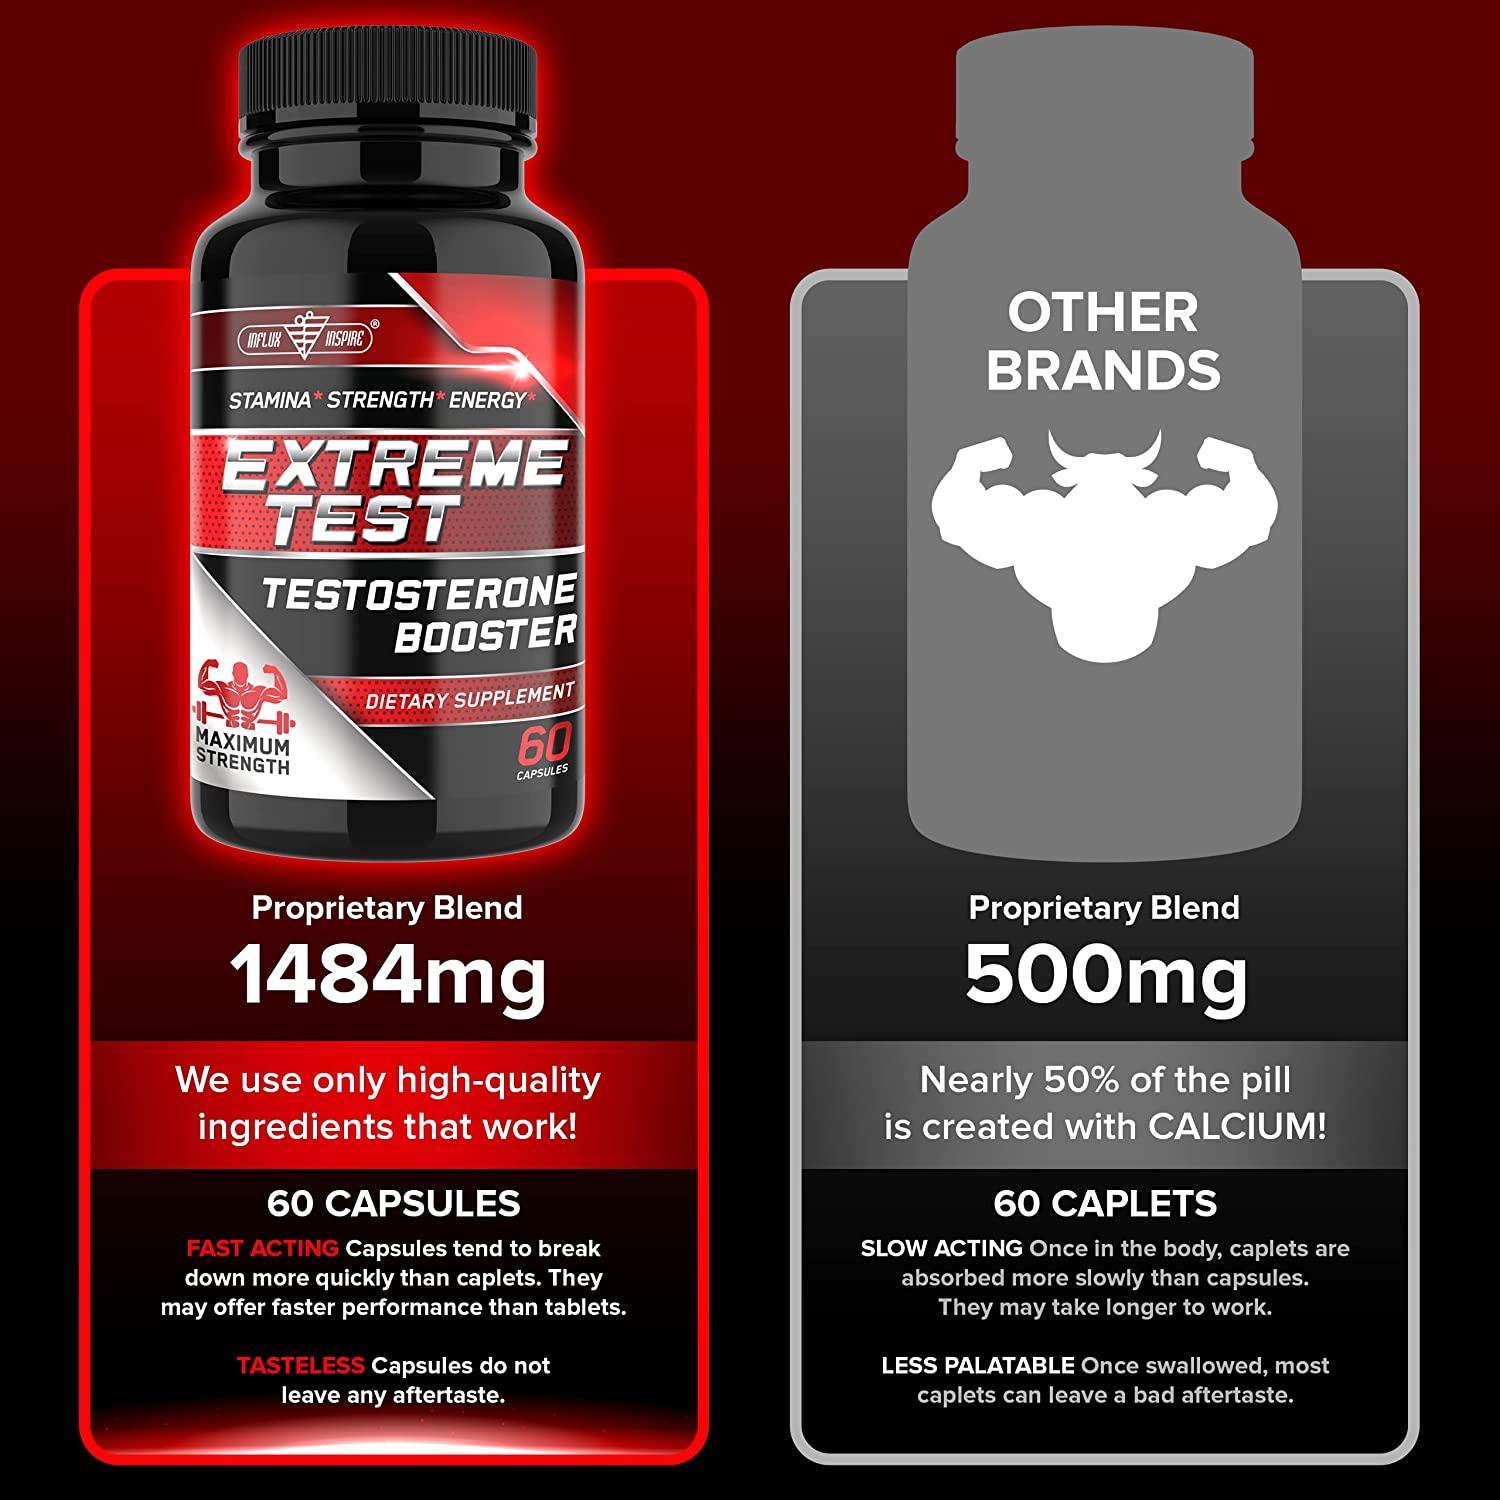 Testosterone Booster For Men Test Booster For Stamina Endurance And Strength 60 Capsules 4851